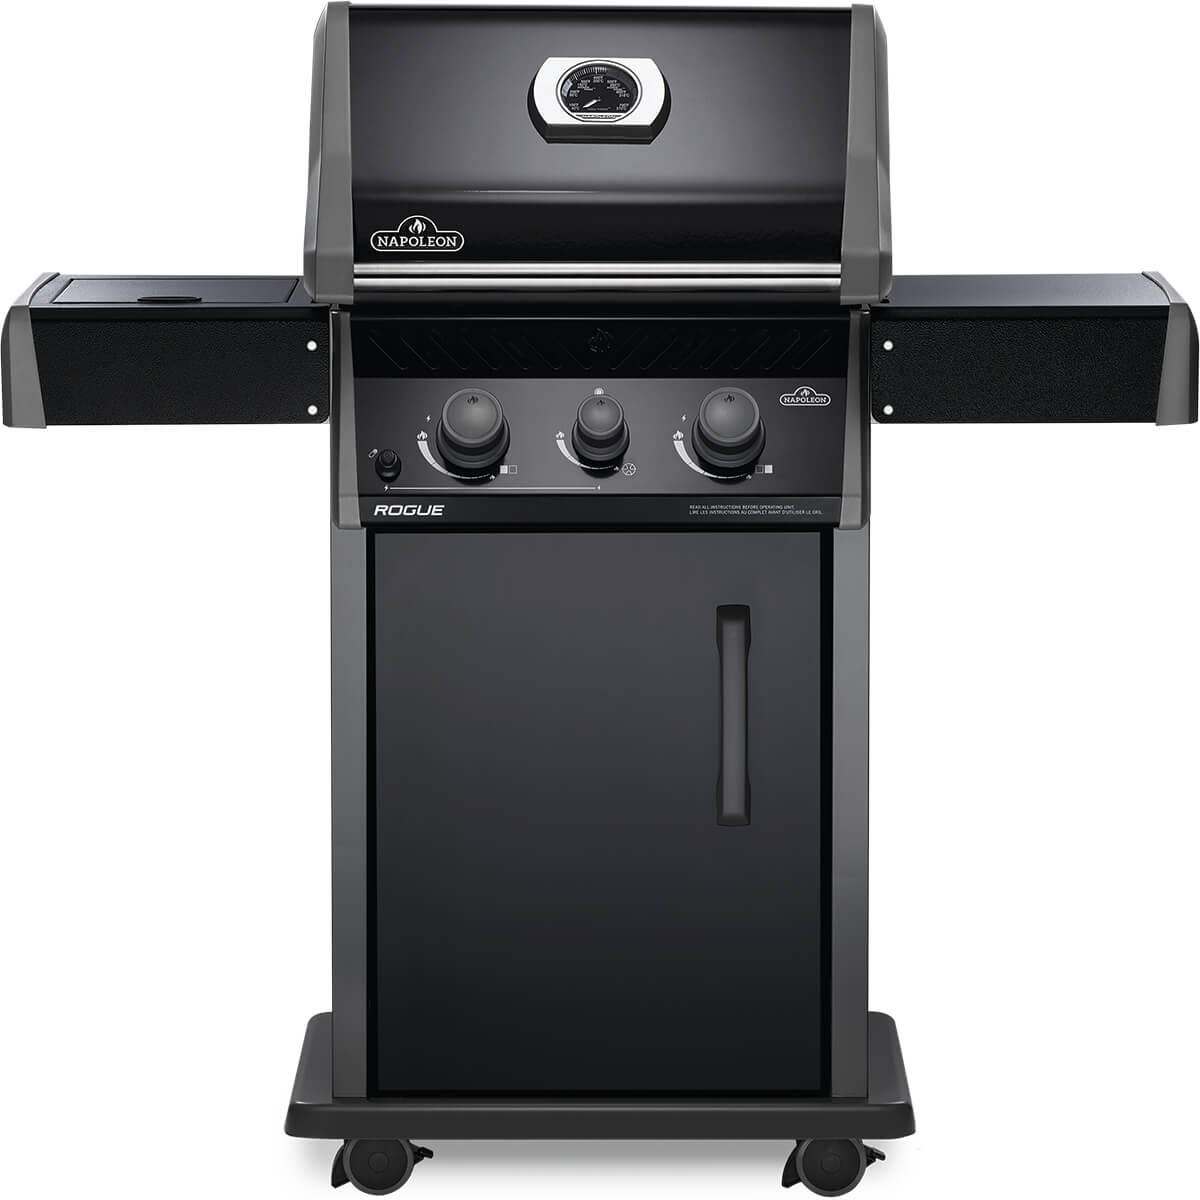 Rogue® 365 Propane Gas Grill with Range Side Burner, Black